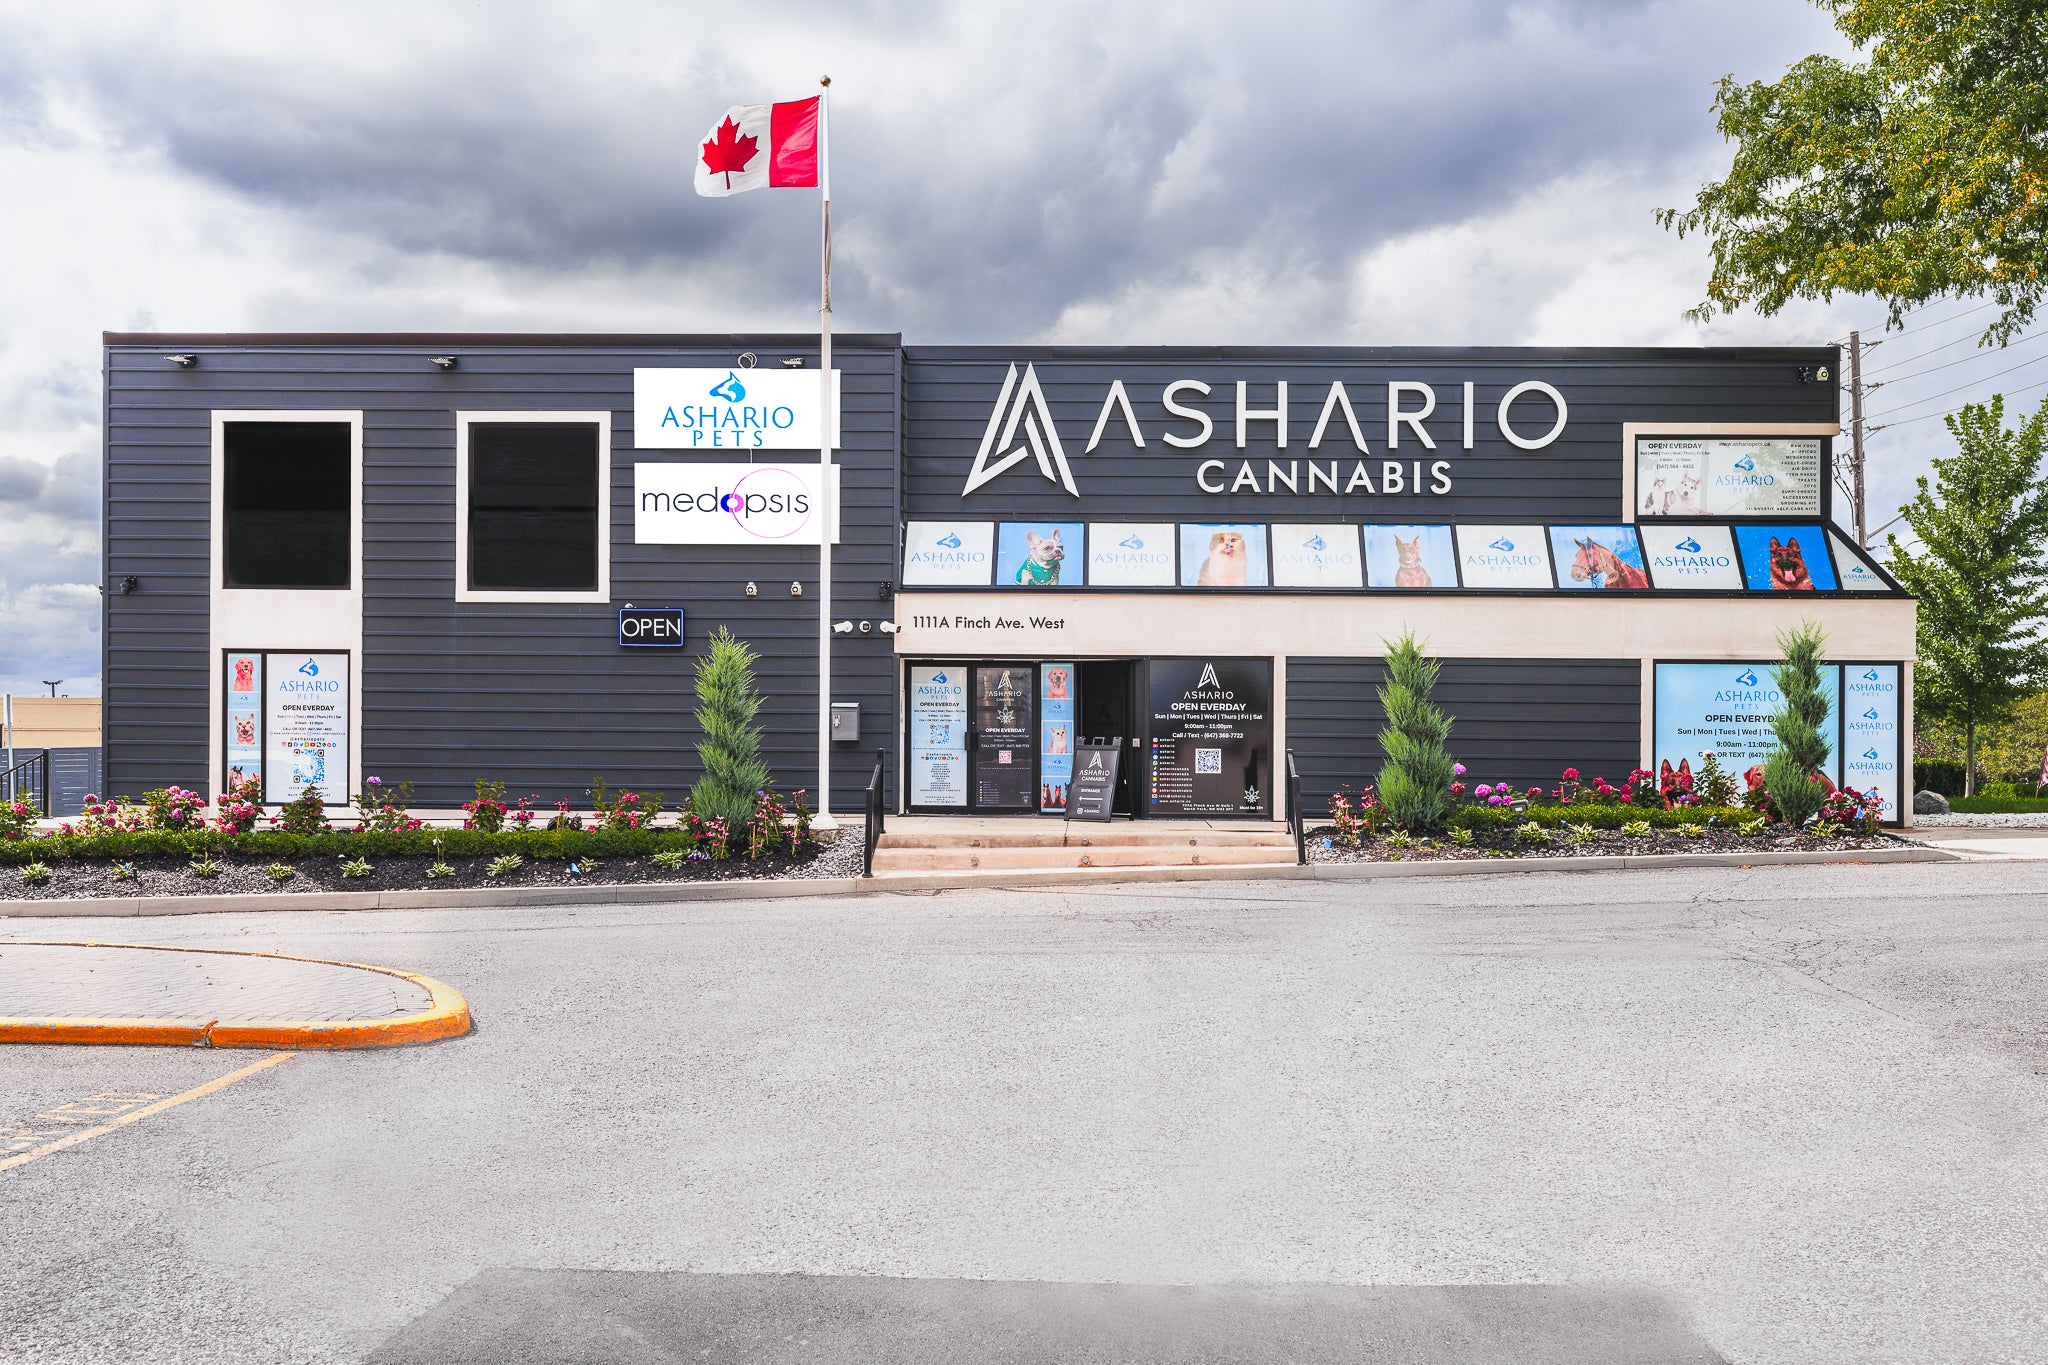 Looking for a weed store near Richmond Hill? Look no further than Ashario Cannabis. Conveniently located, we offer a diverse selection of premium cannabis products to meet your needs.